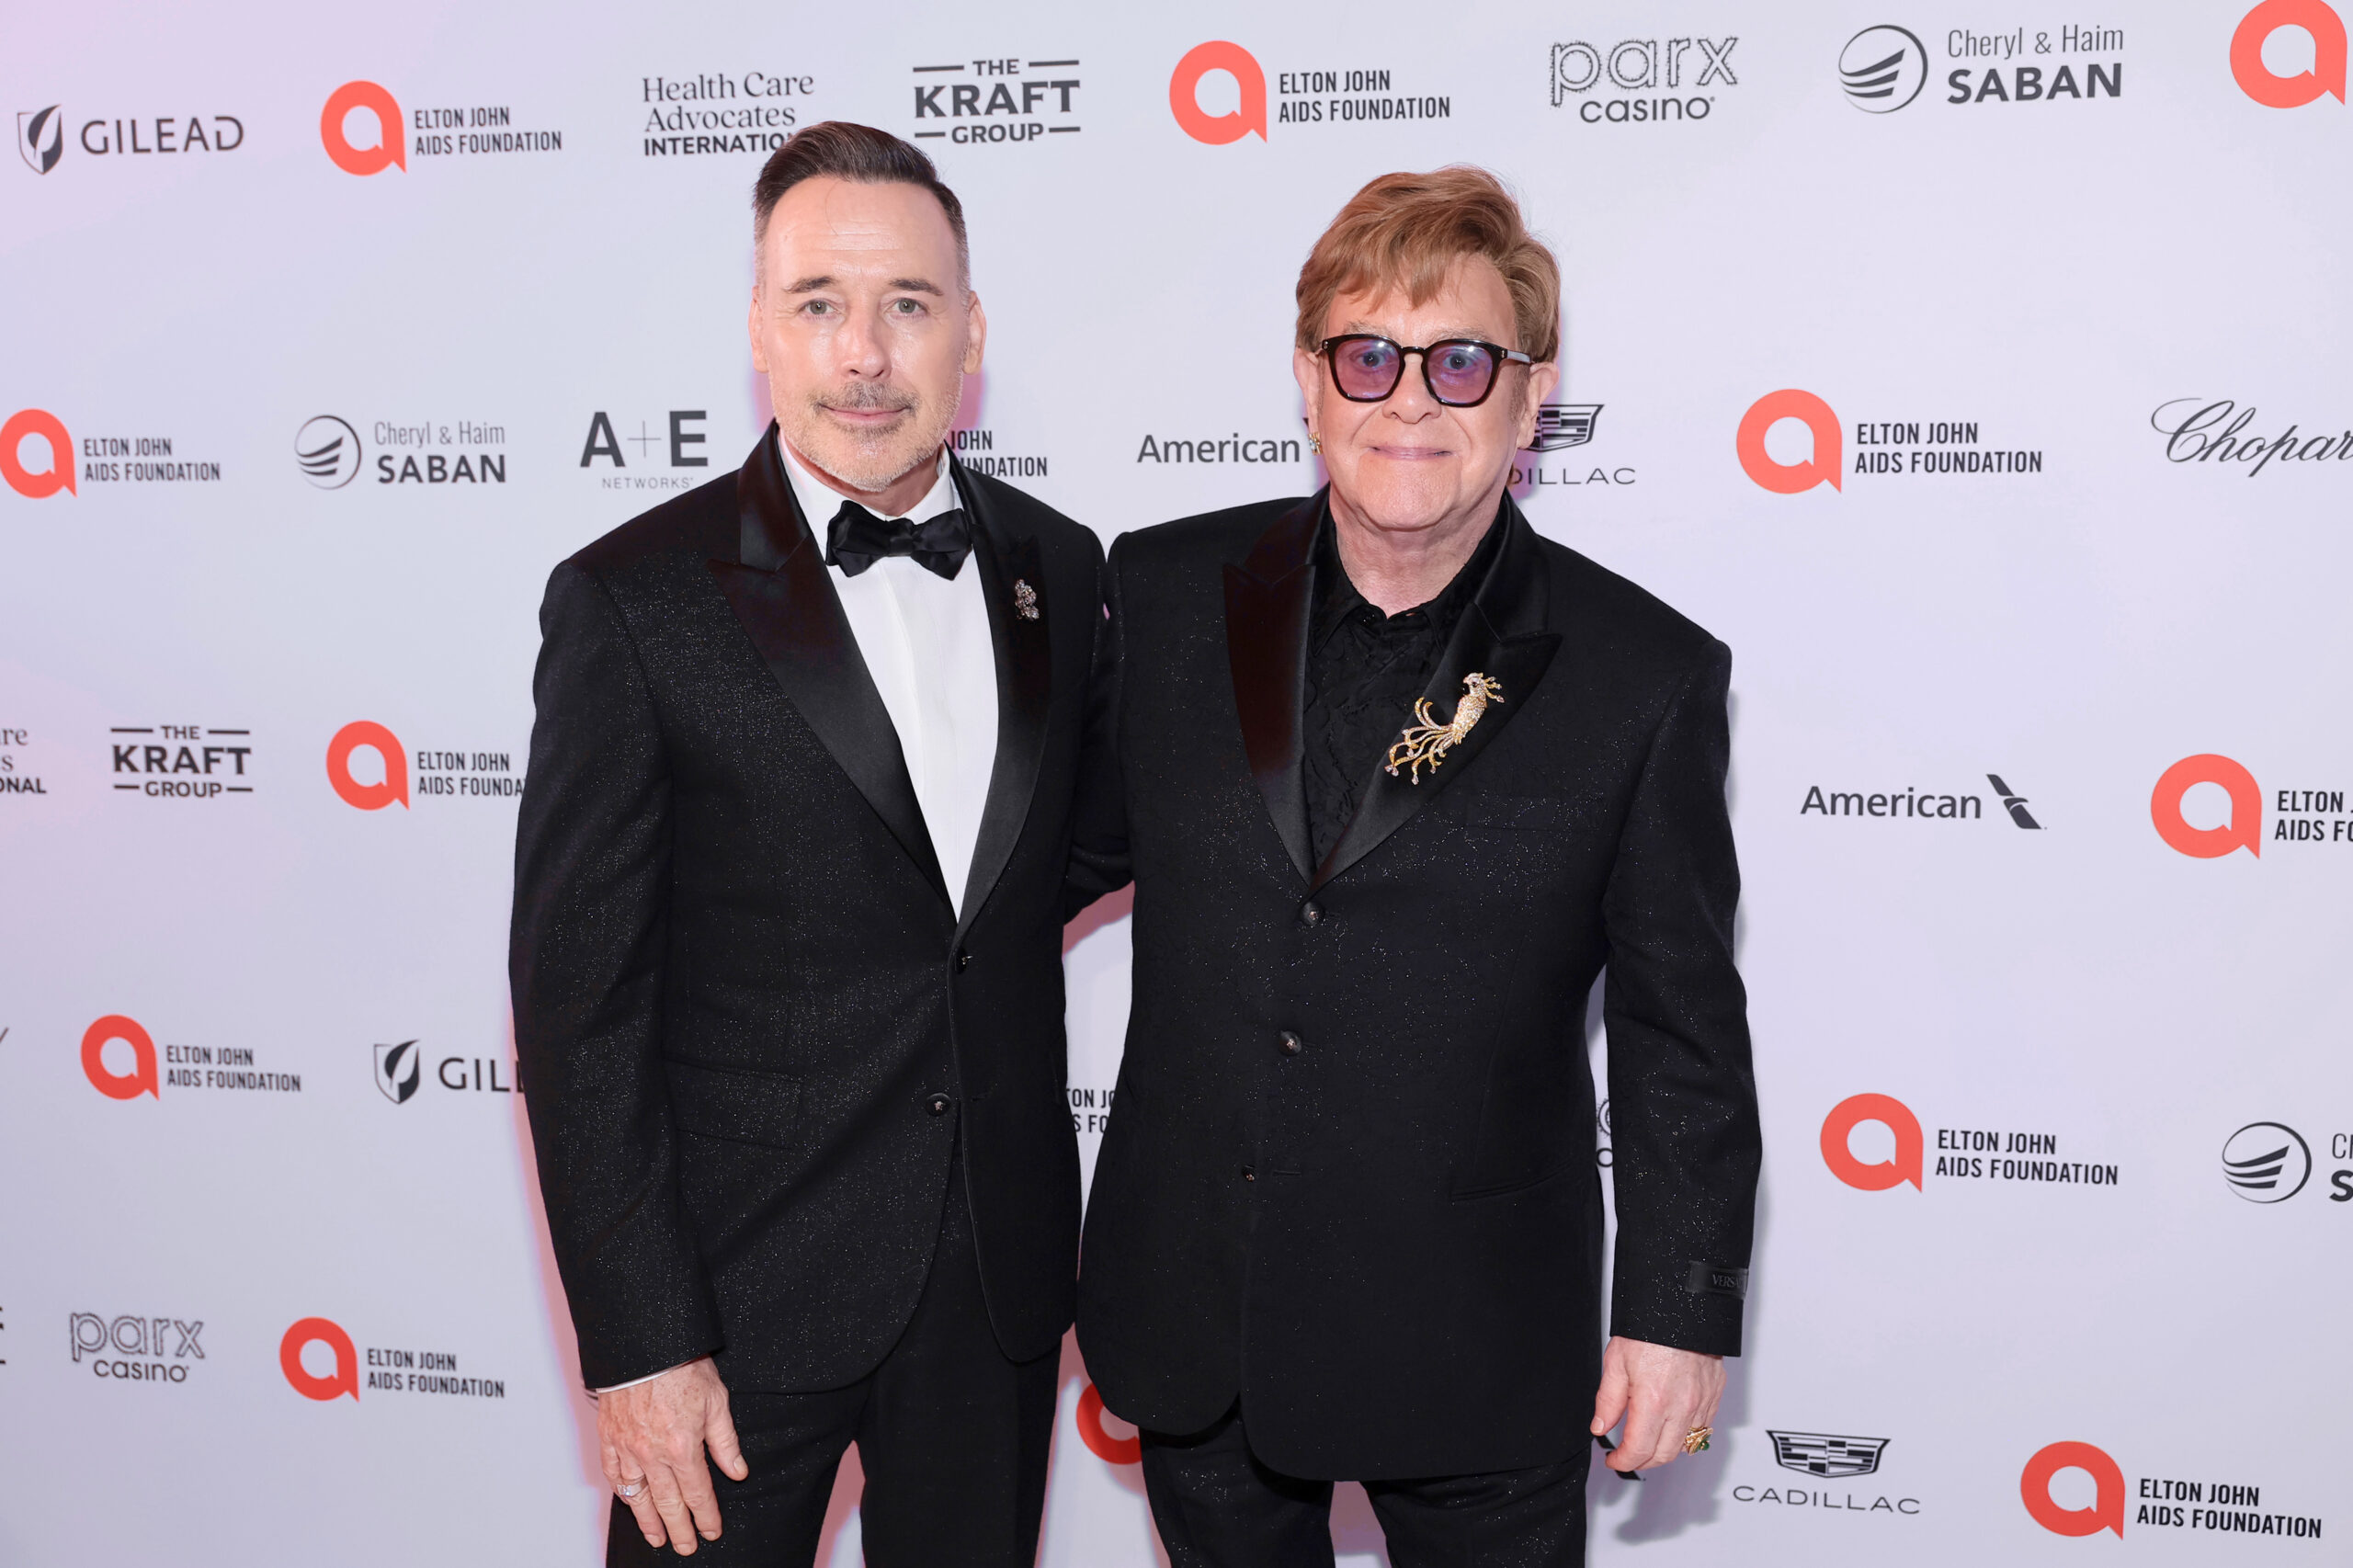 David Furnish and Sir Elton John pose together at the Elton John AIDS Foundation's 32nd Annual Academy Awards Viewing Party, held on March 10, 2024, in West Hollywood, California. Both are dressed in elegant Versace suits.